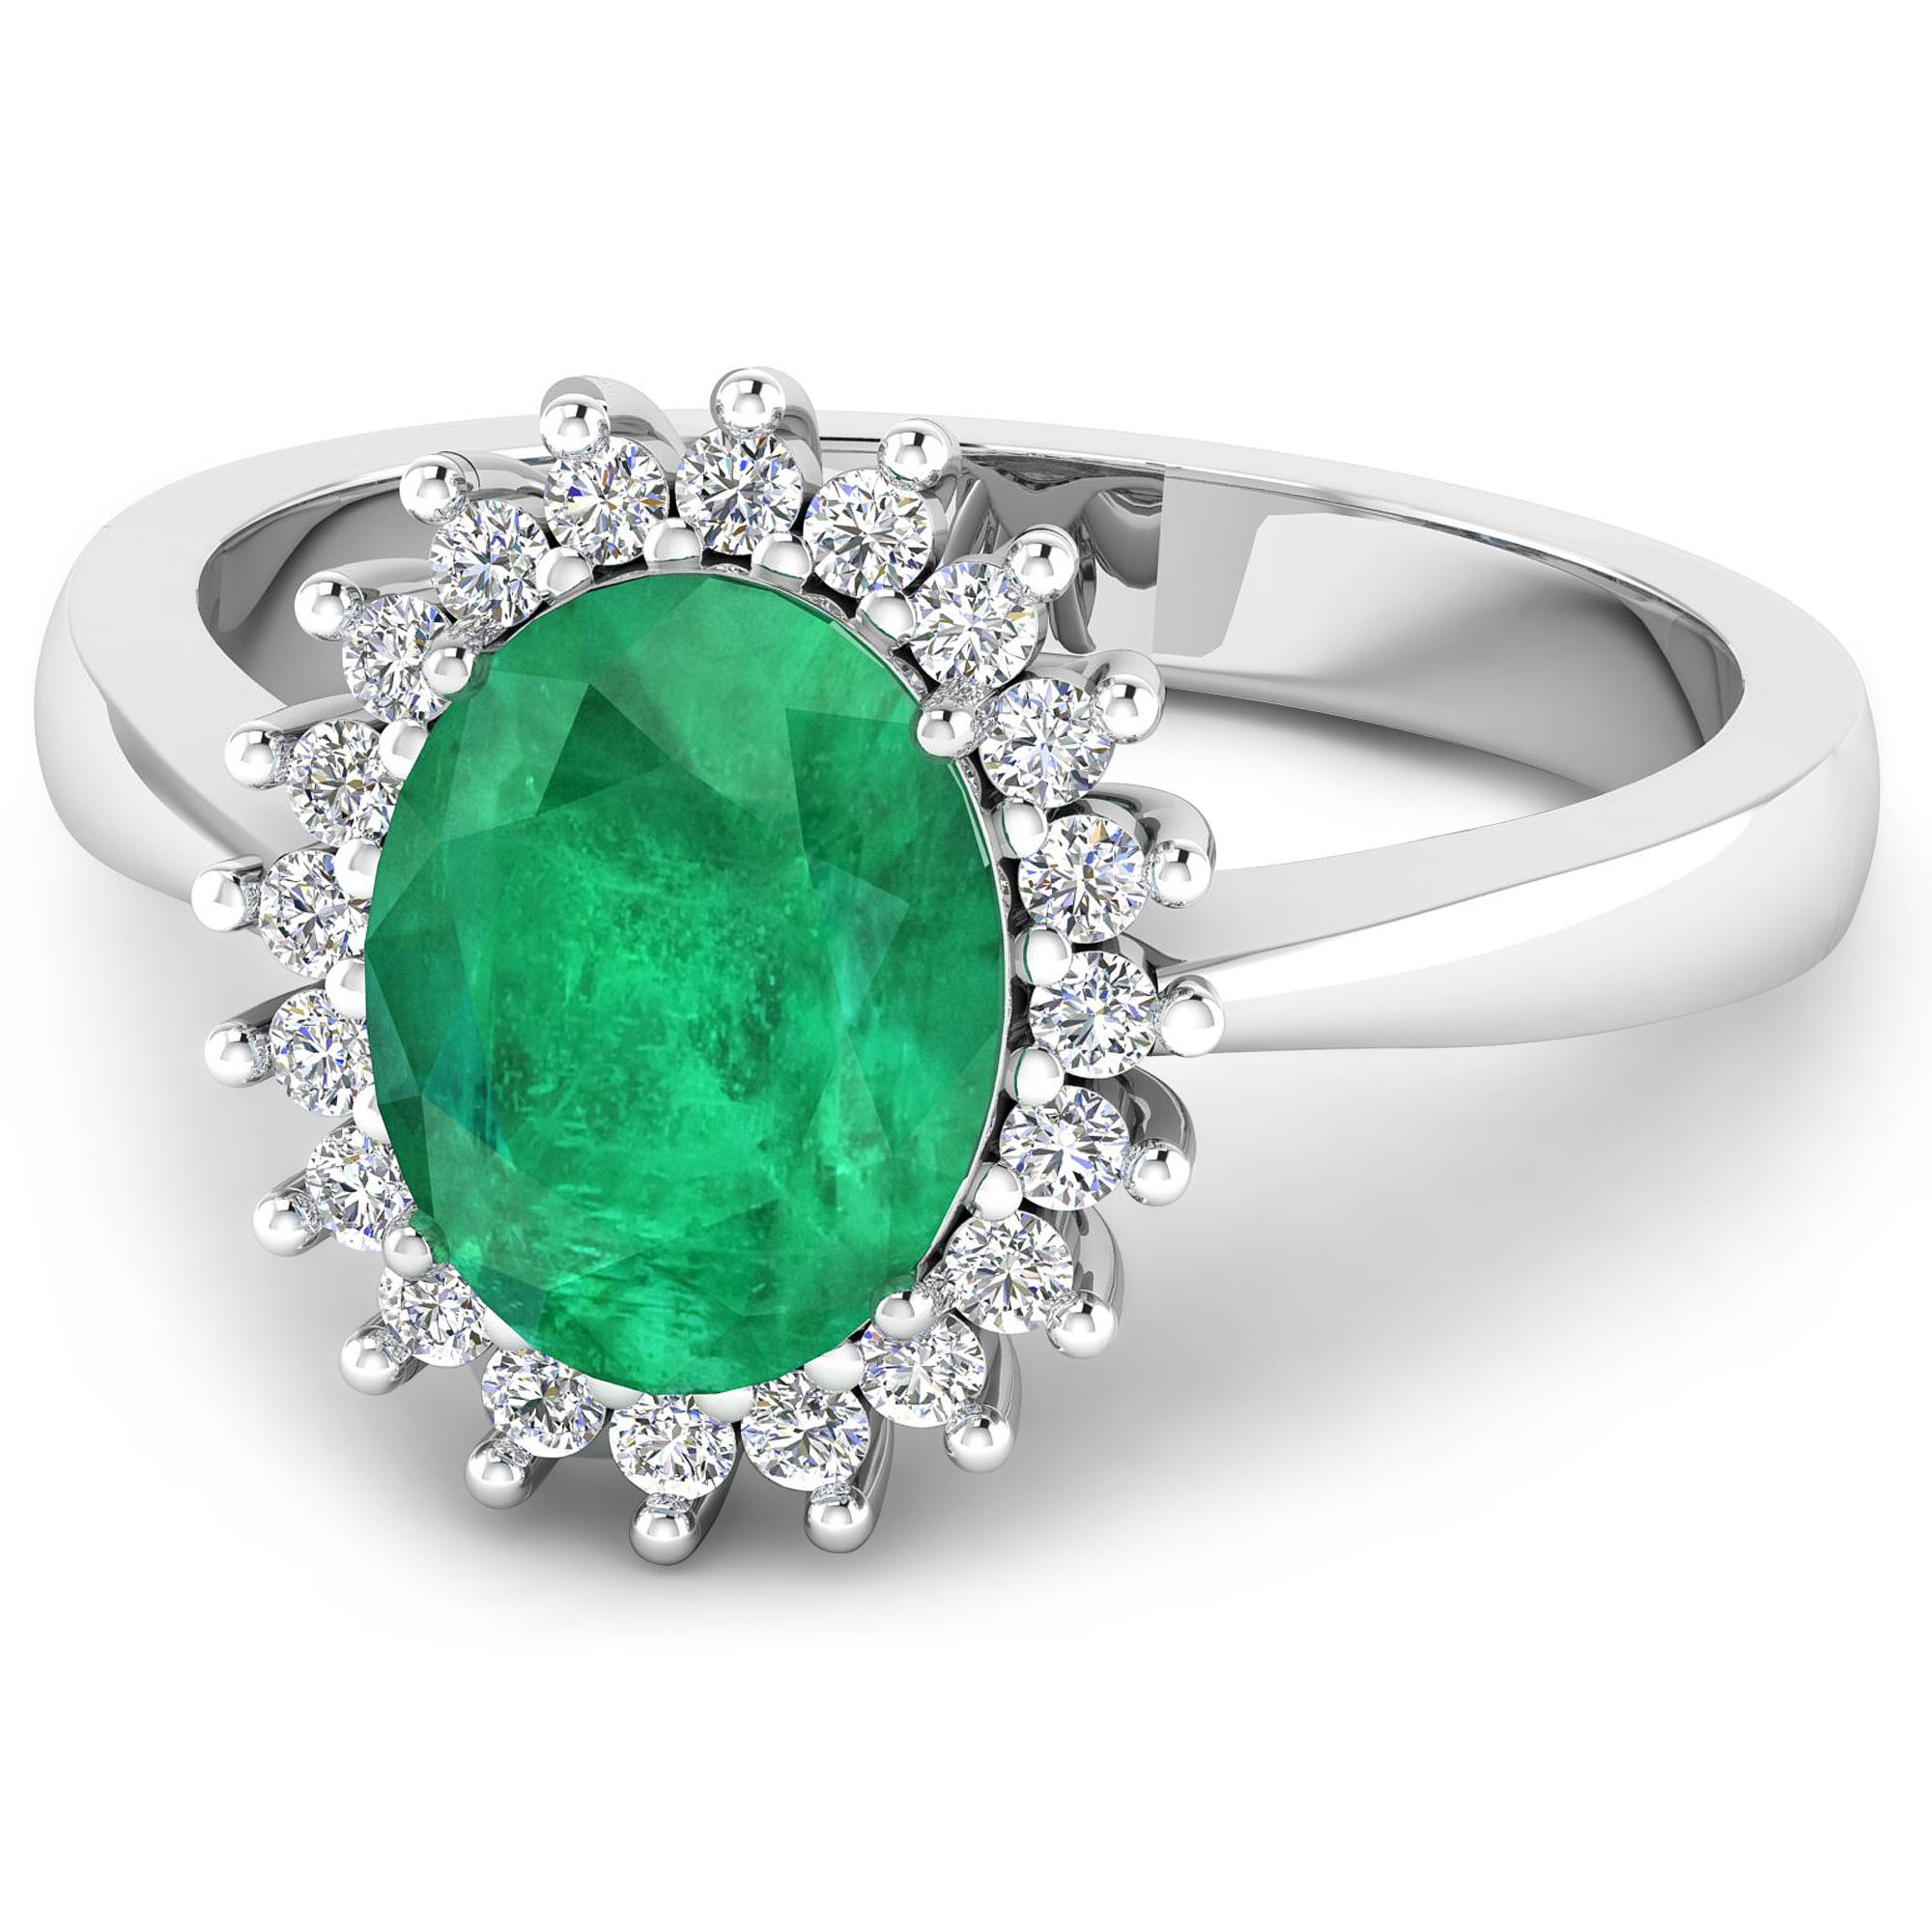 Oval Cut Emerald Gold Ring, 14 Karat Gold Emerald and Diamond Ring, 1.29 Carat For Sale